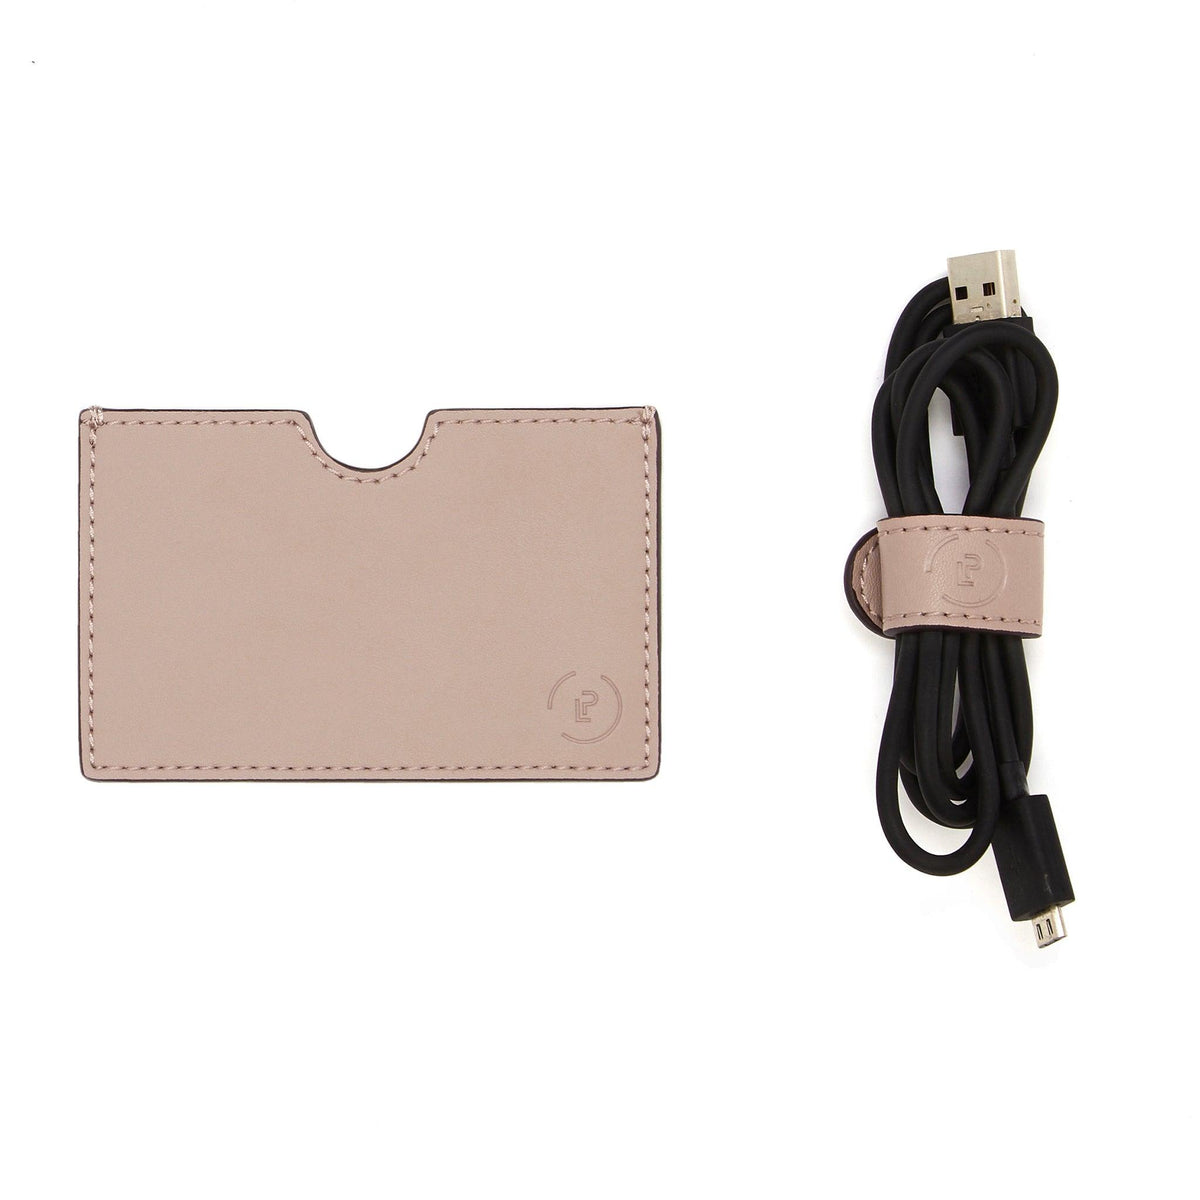 Card Wallet and Cable Tidy in Oxblood Rose colourway secured around charging wire